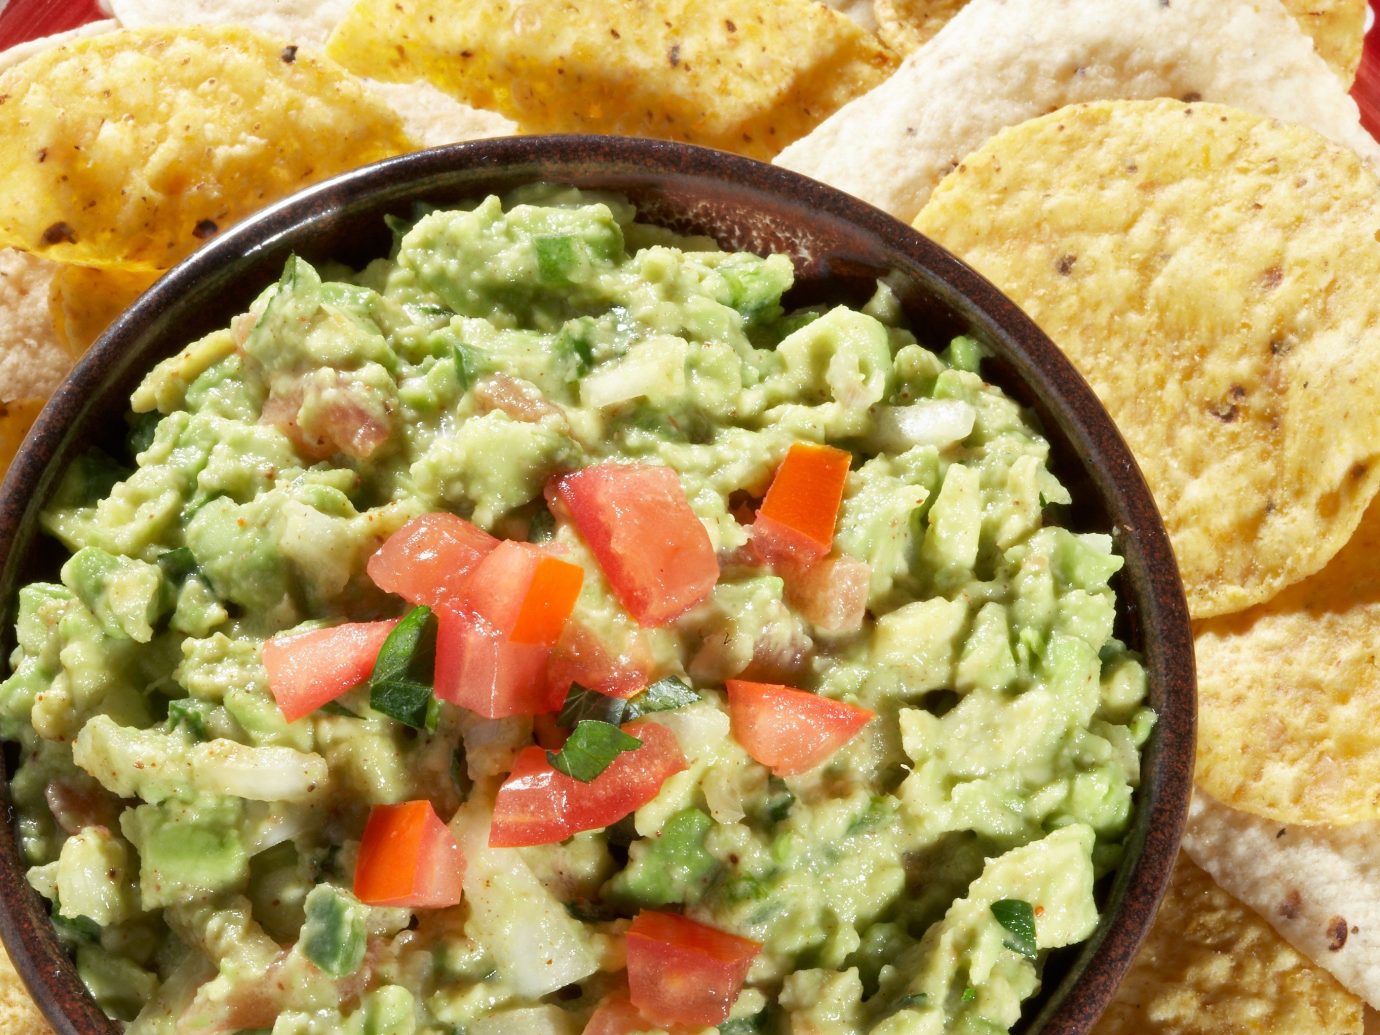 Food + Drink Trip Ideas food dish chip cuisine tostada guacamole vegetable dip rice snack food produce meal vegetarian food breakfast condiment different containing several variety